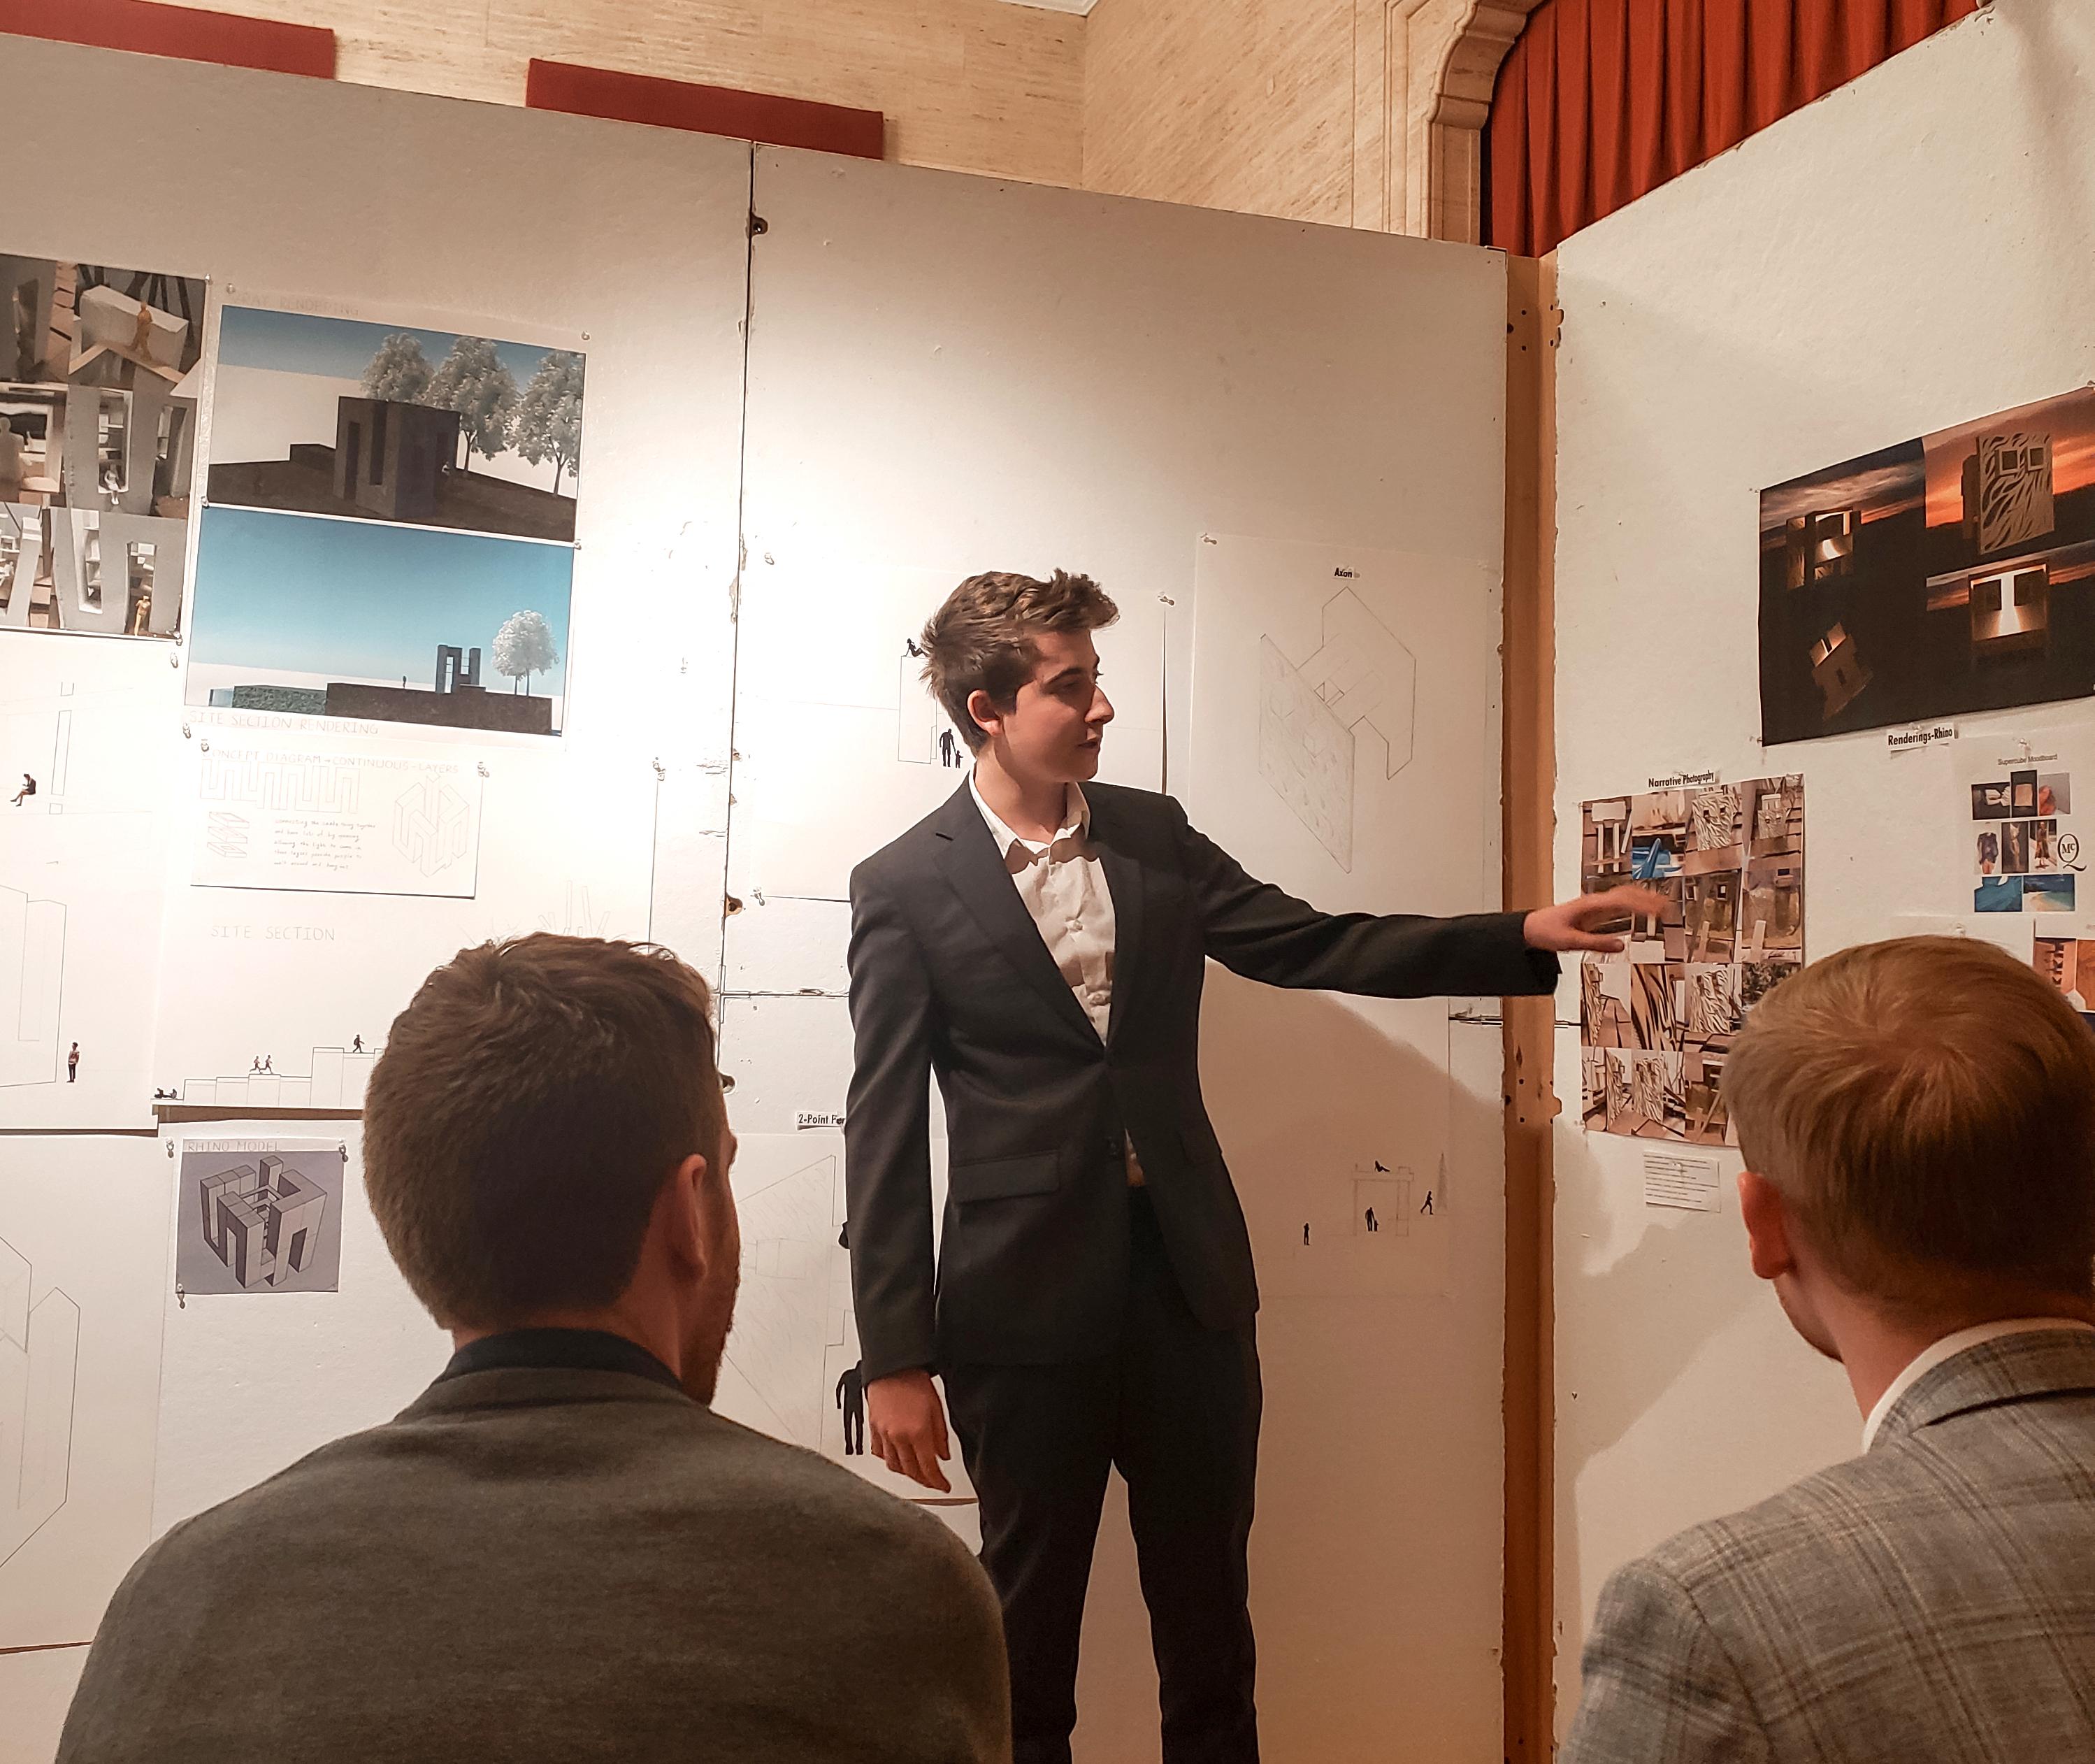 man presenting architectural work to audience